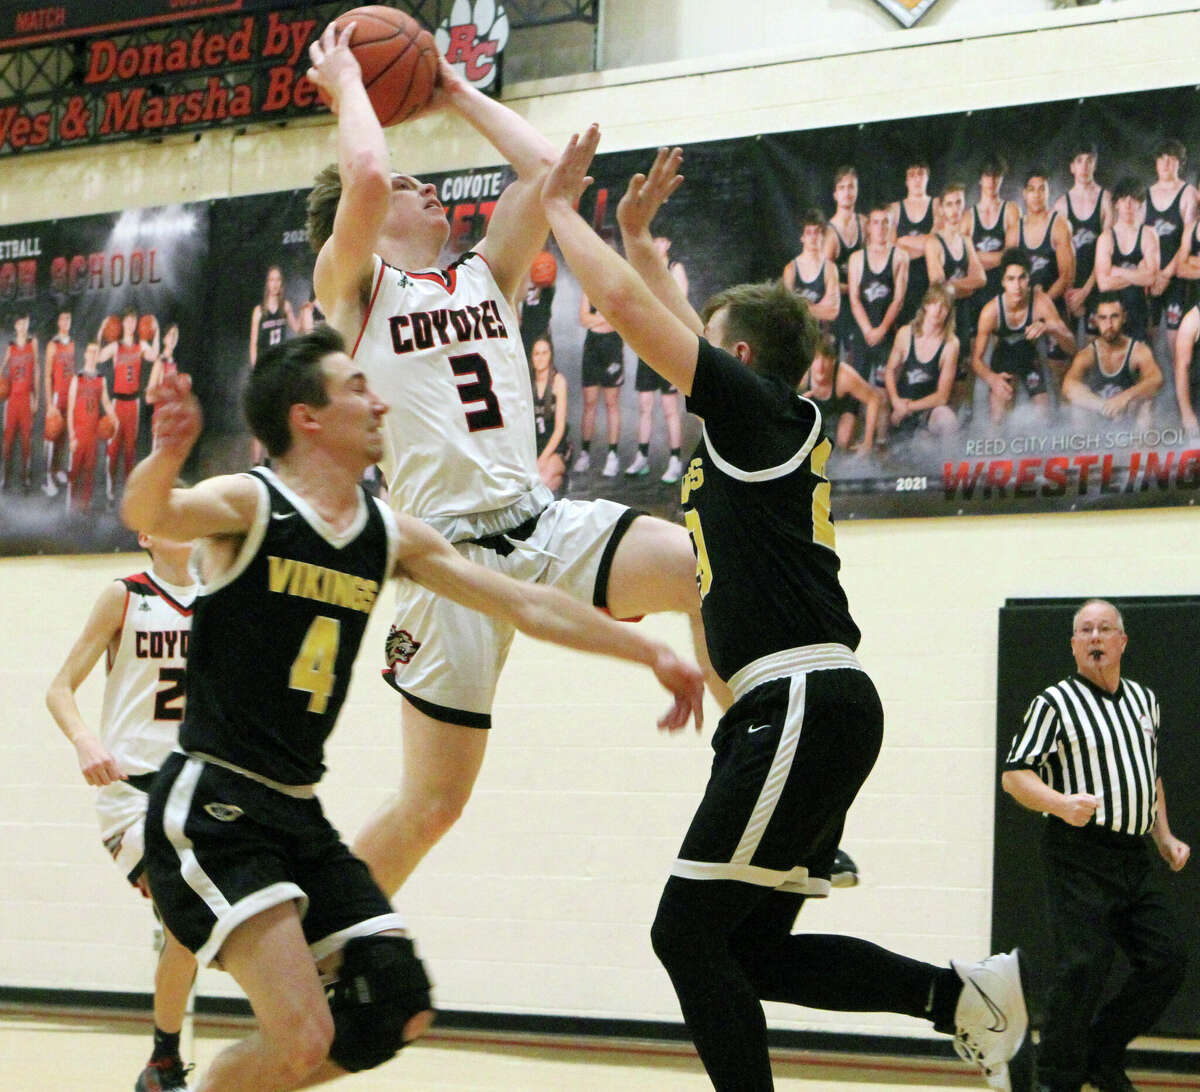 The Reed City boys basketball team defeated Tri County 70-53 on Friday evening.